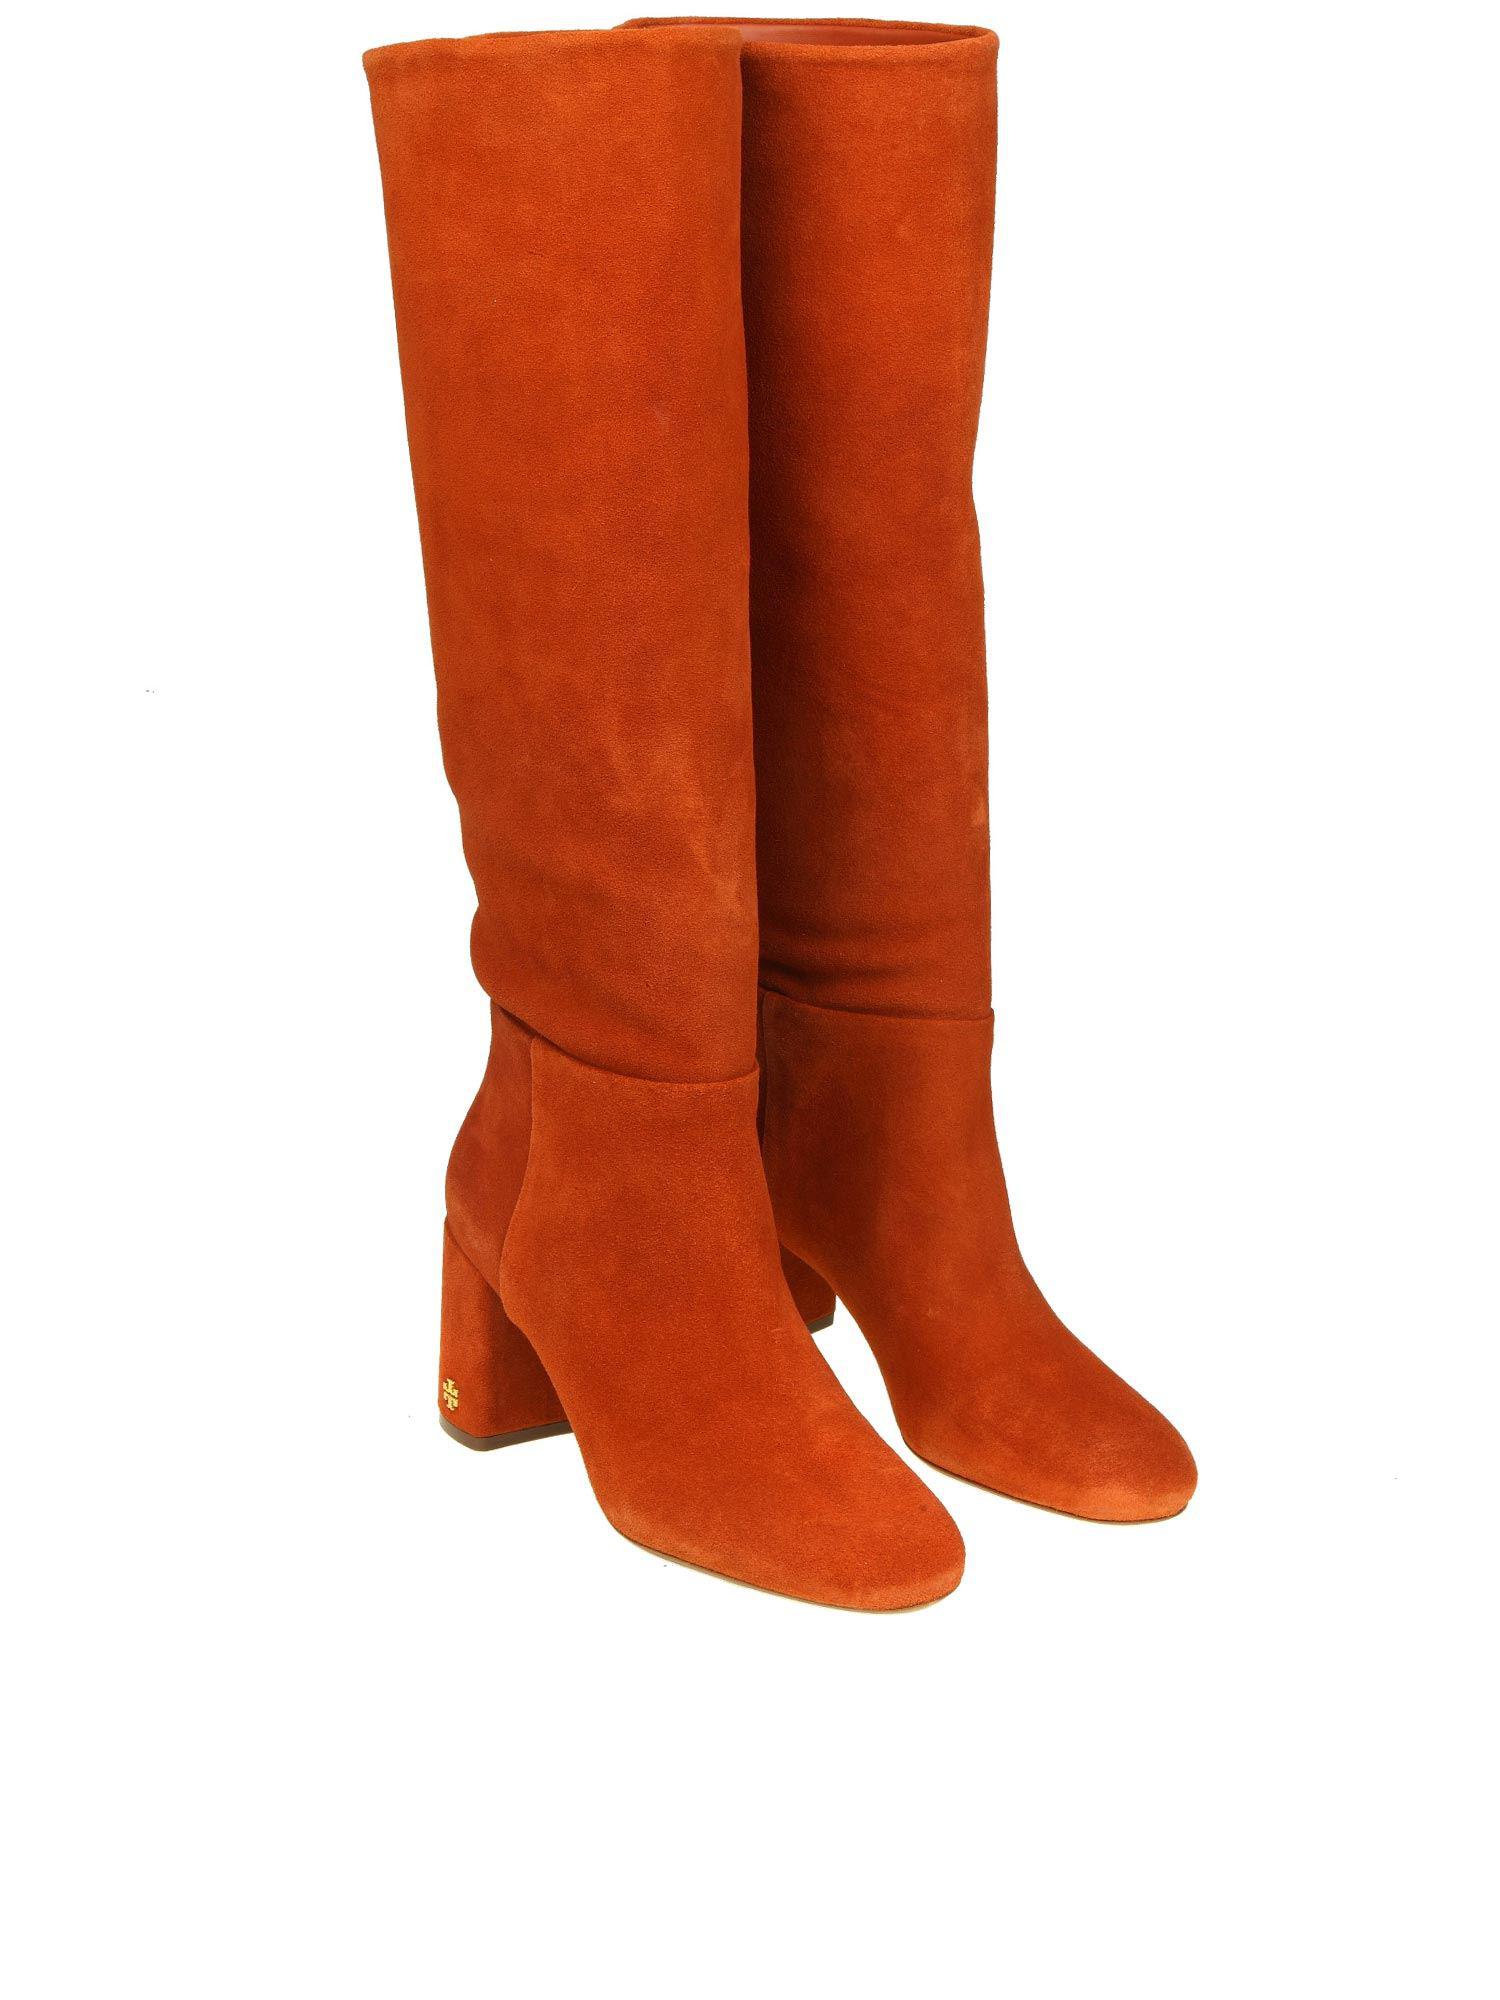 rust colored suede boots